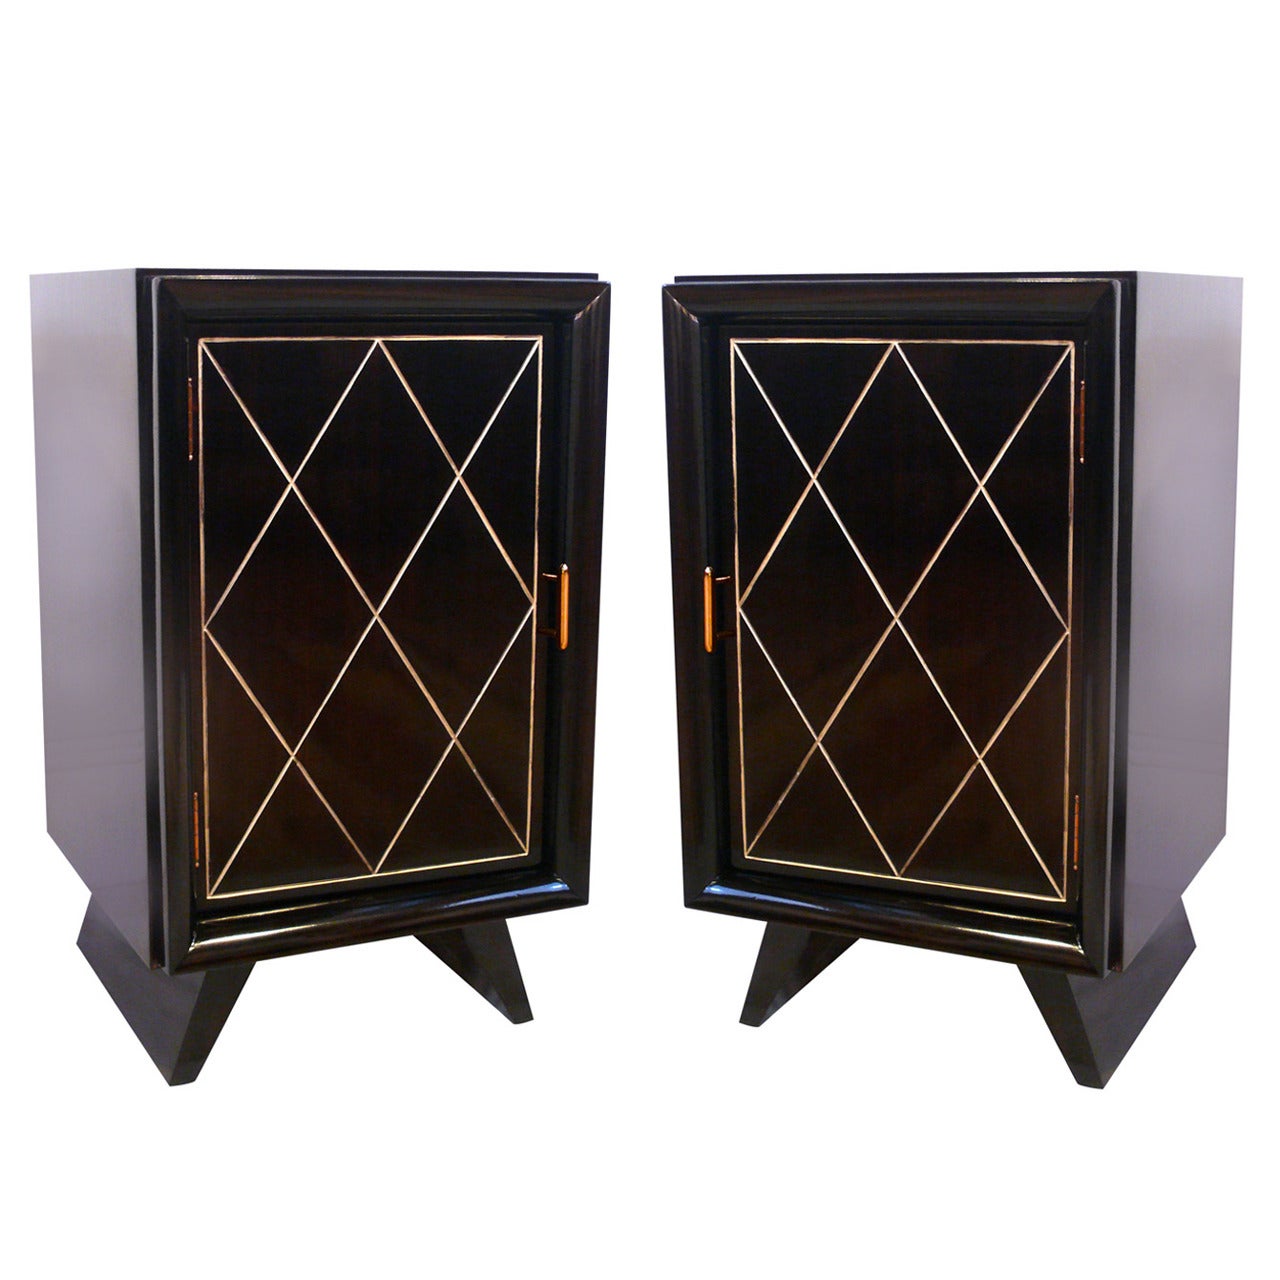 Pair of Incised Diamond End Tables in the Manner of Grosfeld House